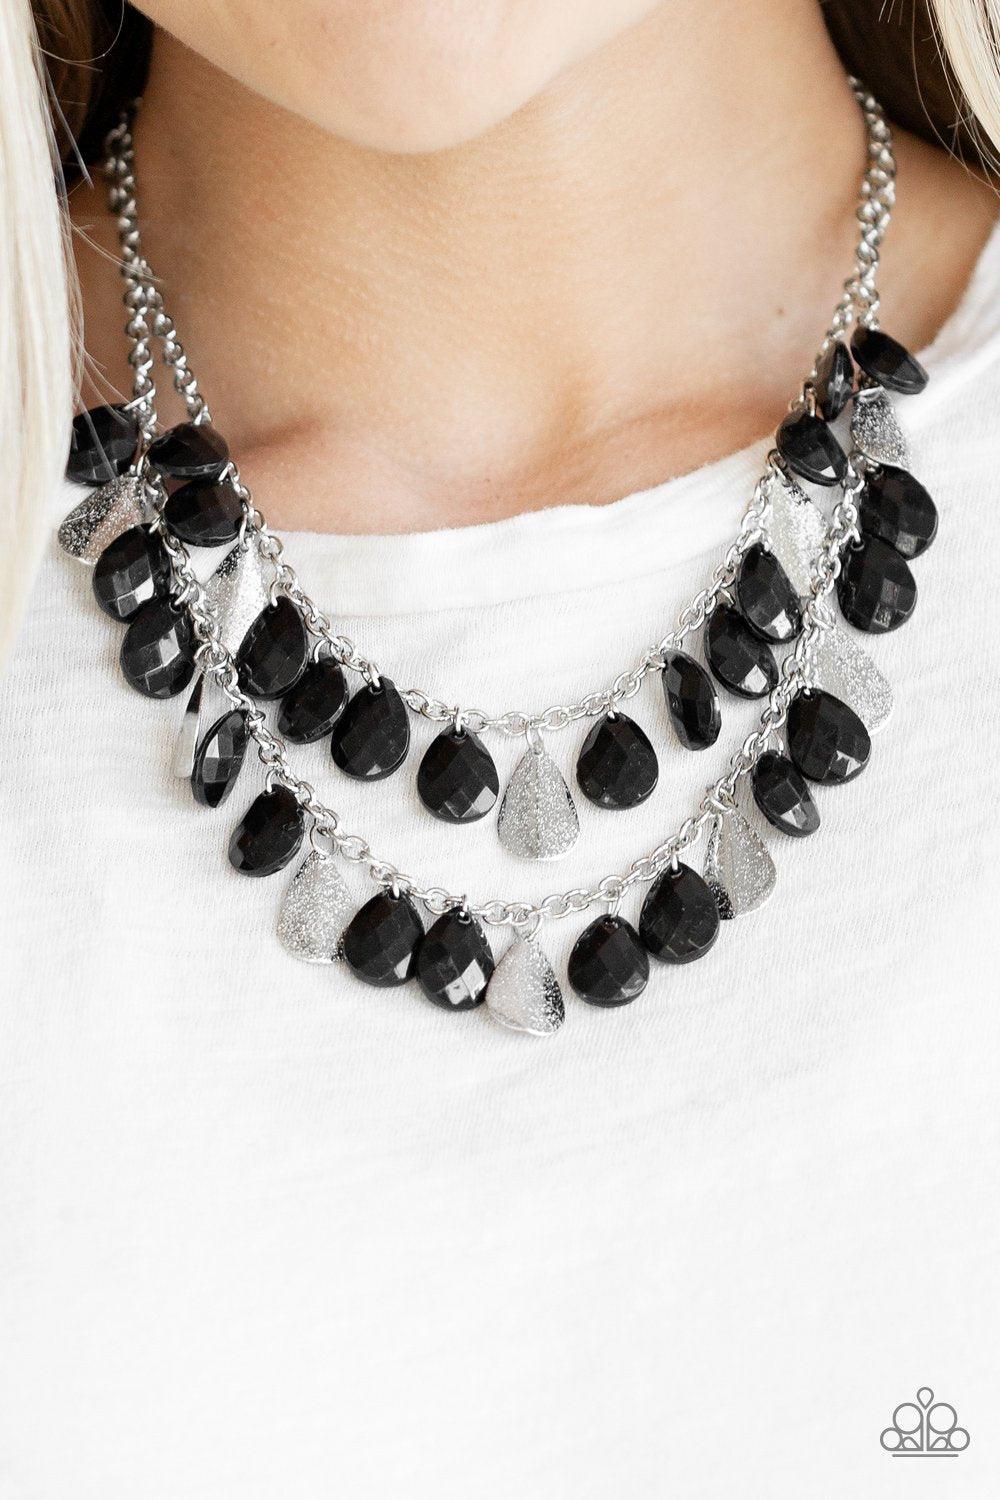 Paparazzi Accessories Life of the FIESTA - Black Two strands of silver chain are decorated in a flirtatious fringe of faceted black teardrops. Glittery beveled silver teardrops are sprinkled between the black beading, adding hints of shimmer to the vibran